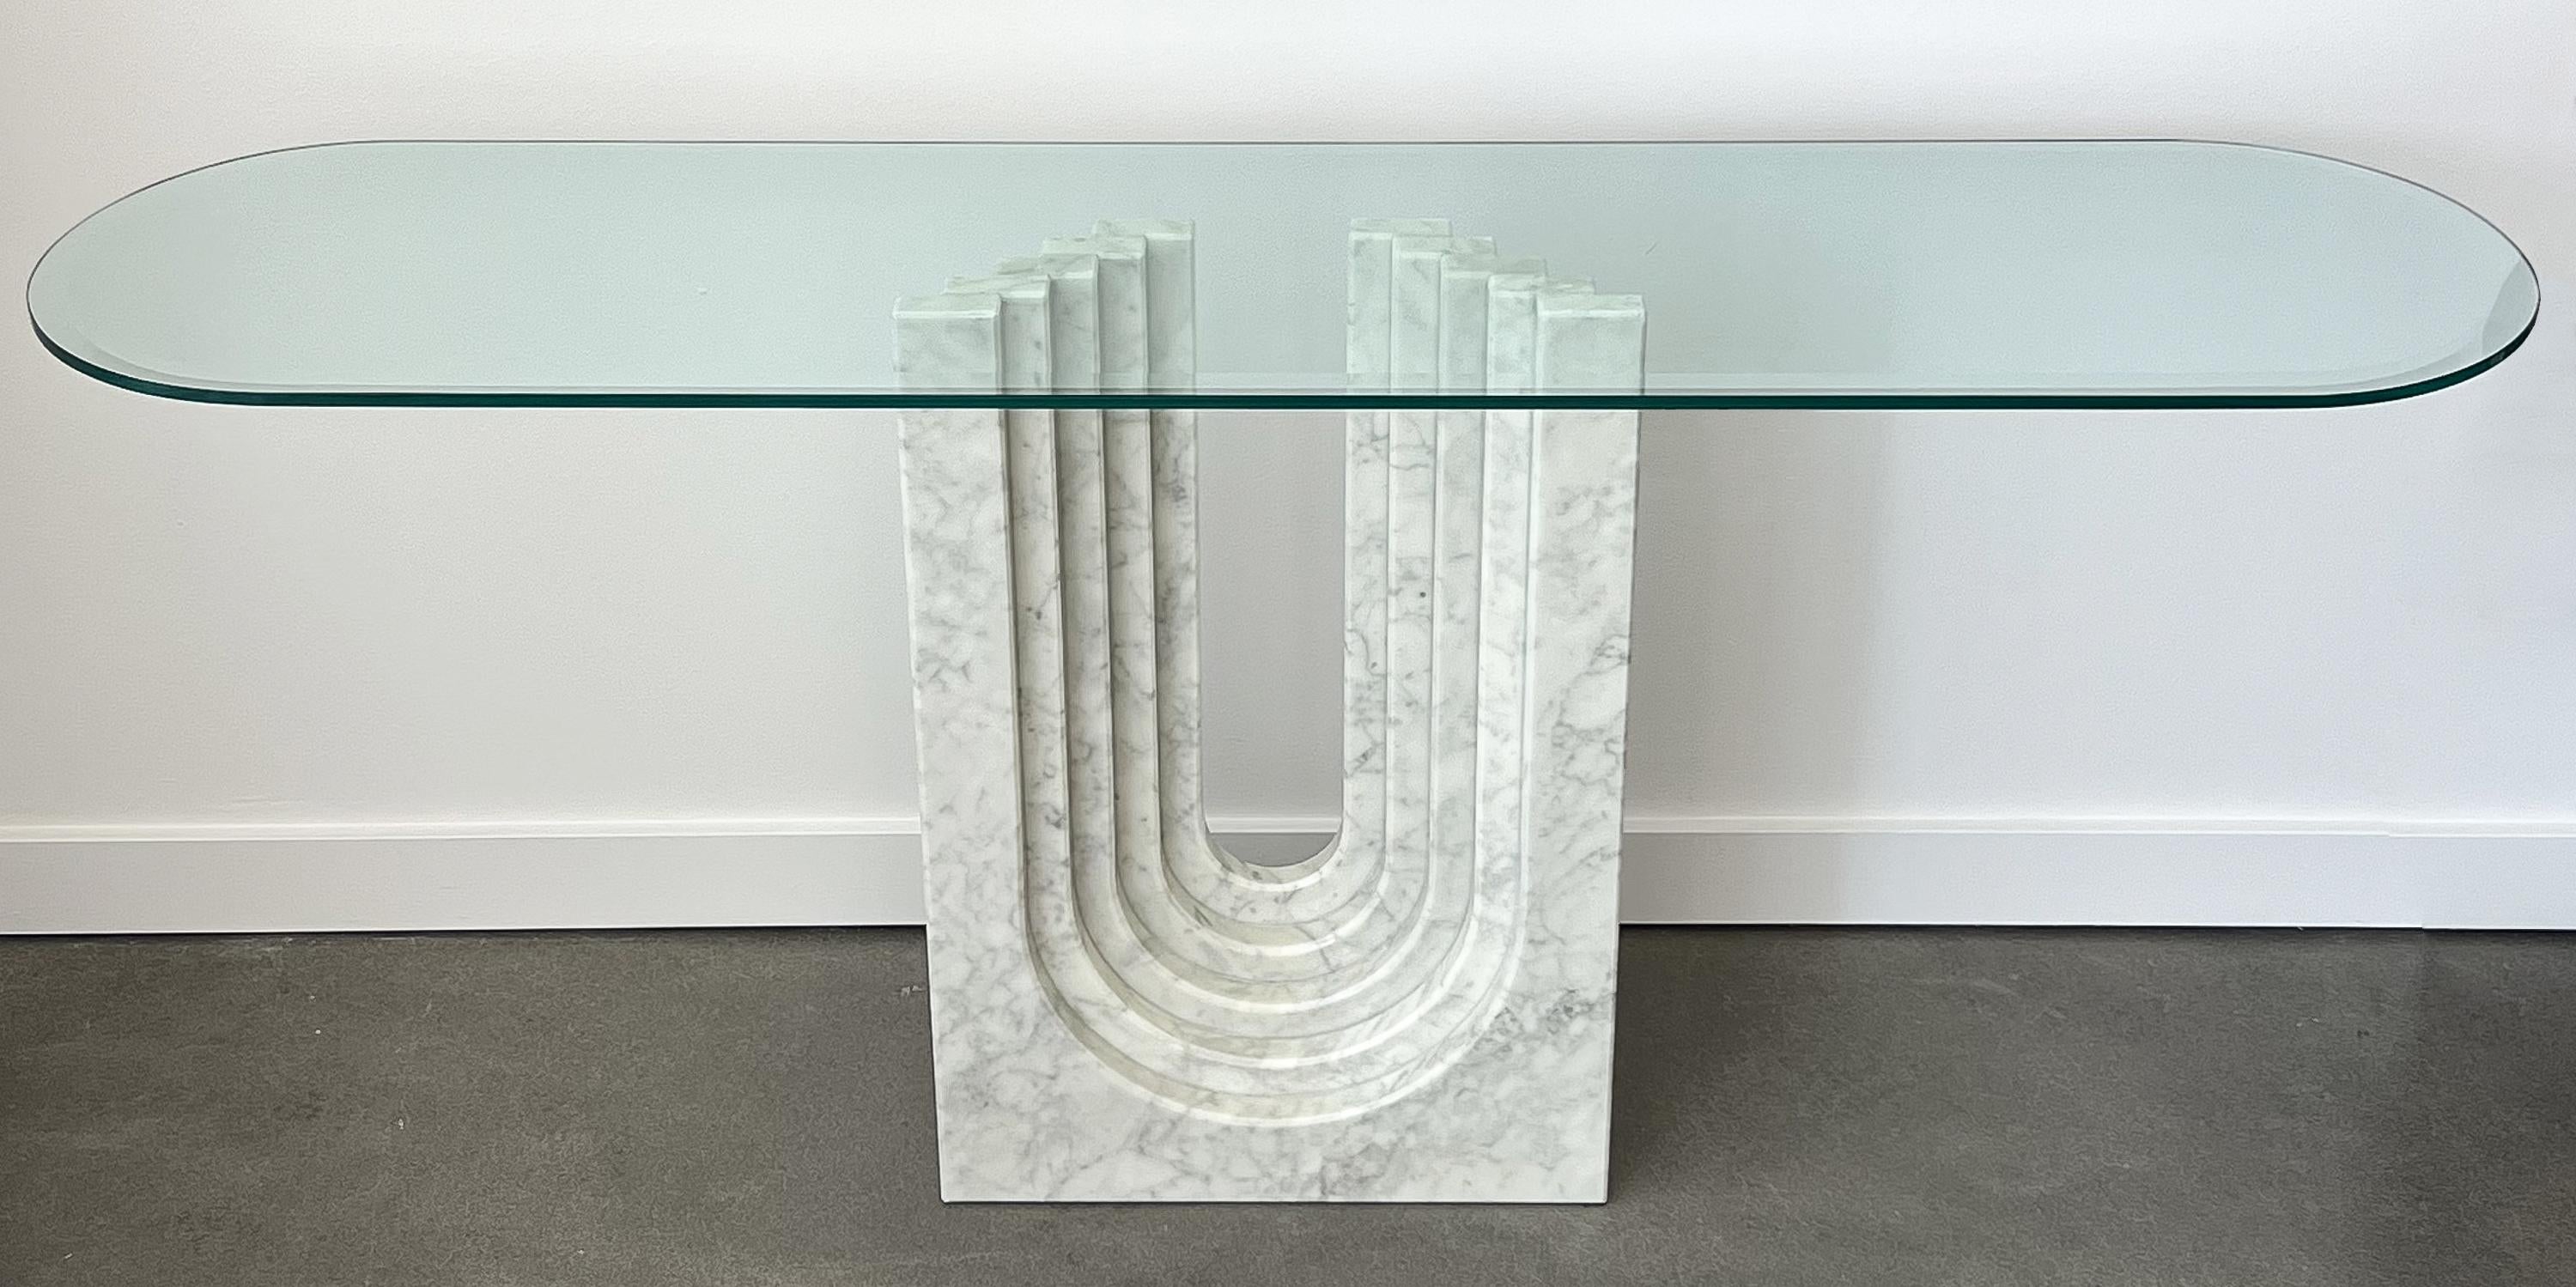 Modern white Cararra marble and glass console table by Carlo Scarpa for Cattelan Italia, circa 1970s. Five layers of stacked / stepped marble with U-shaped cutout create the sculptural pedestal for the glass top. White Carrara marble with gray